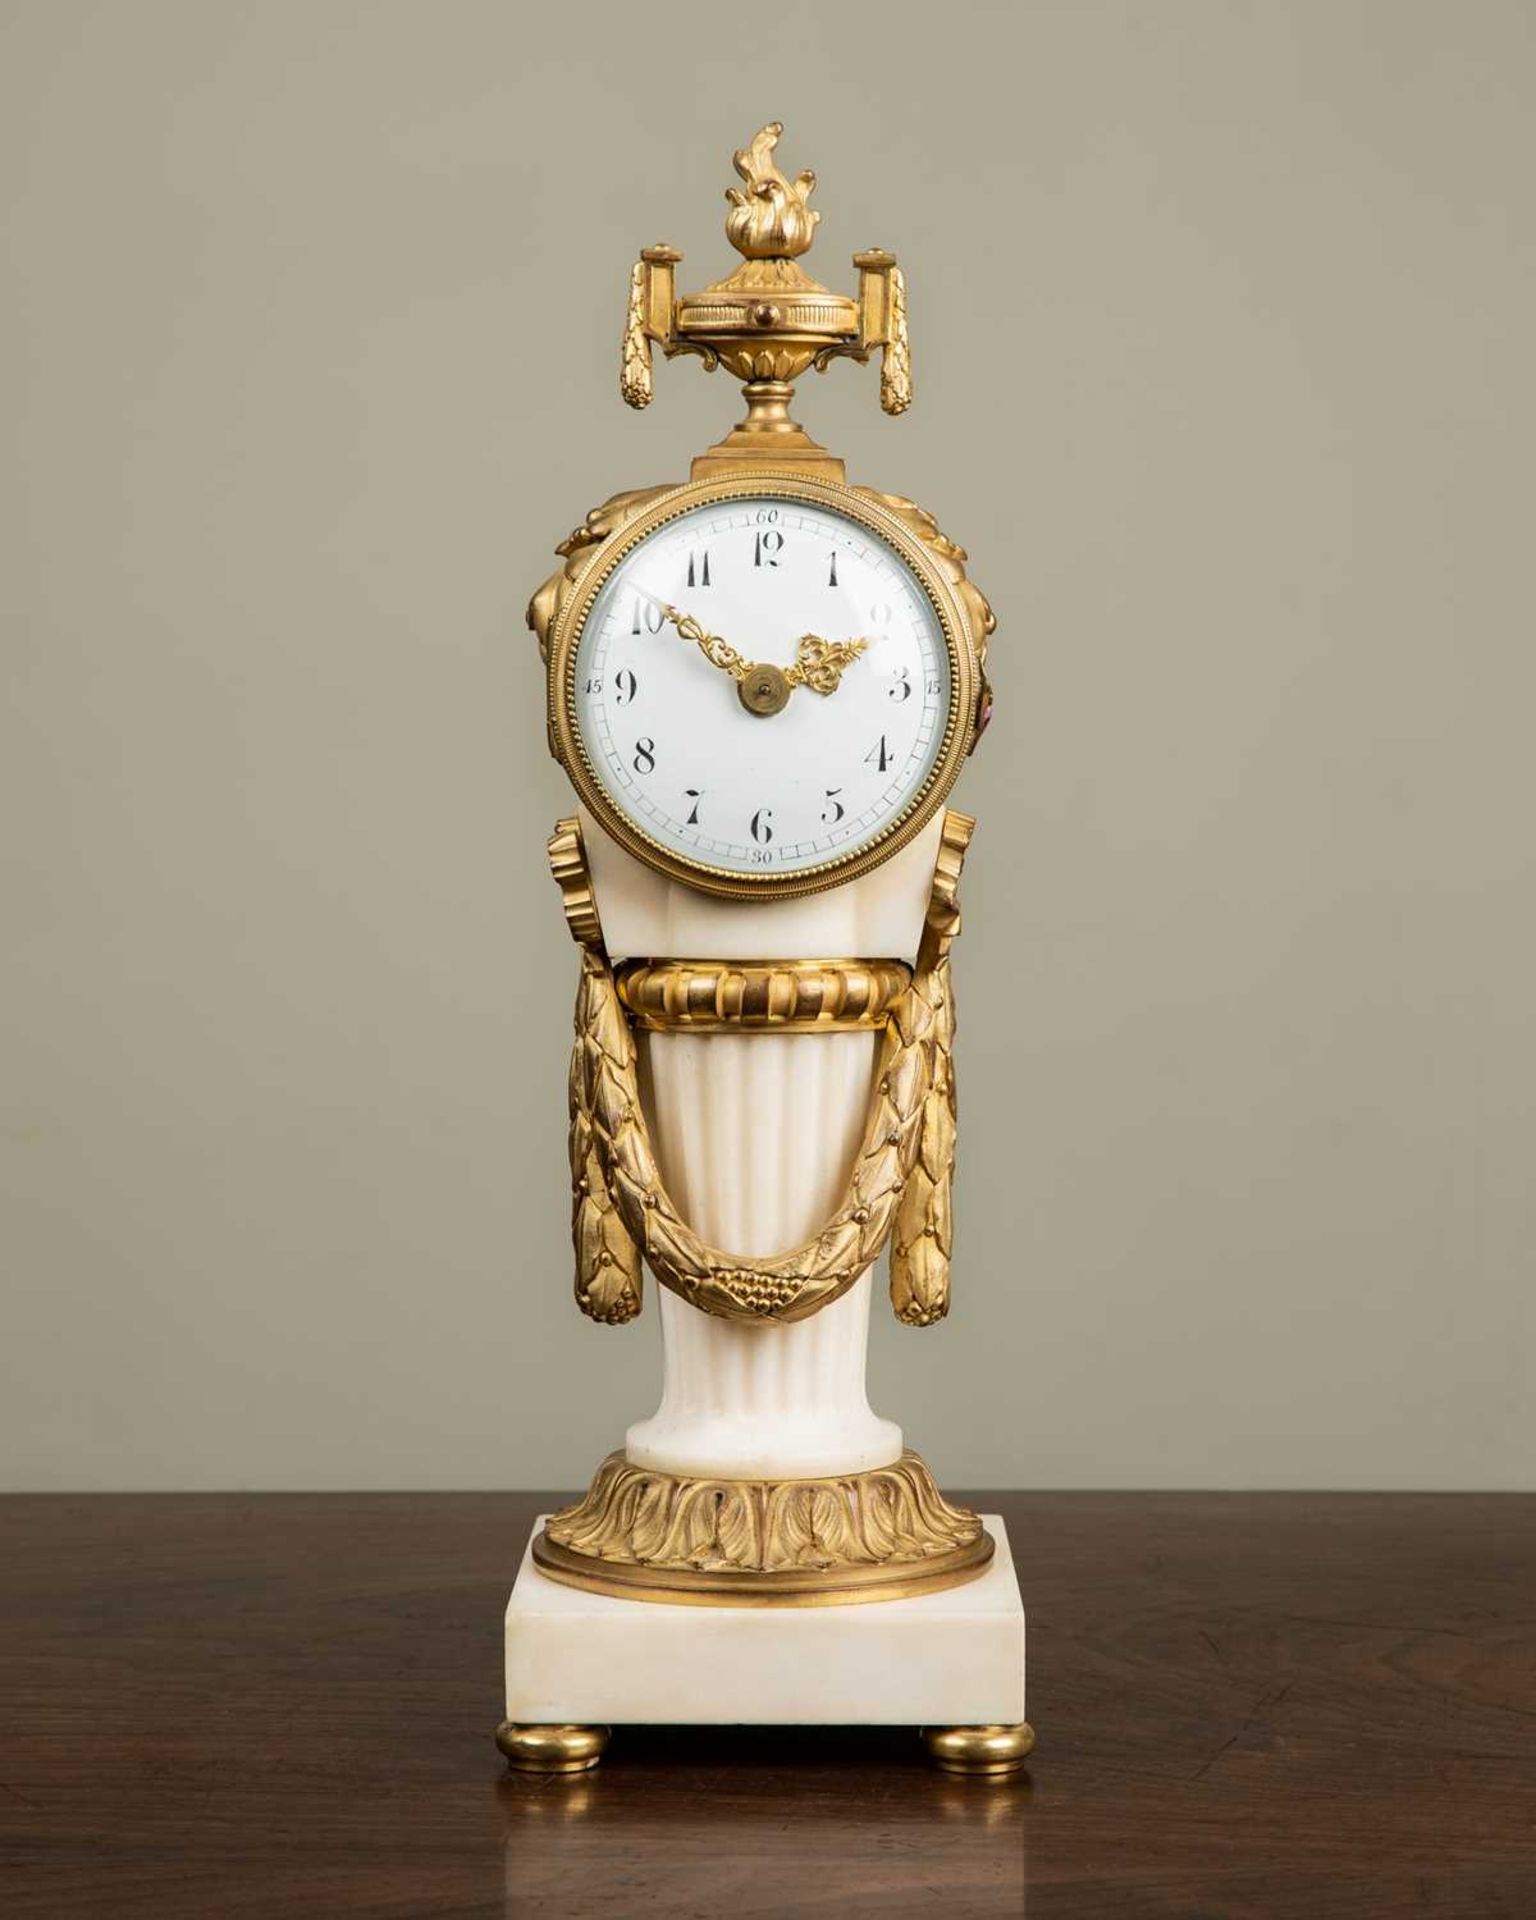 An early 20th century French ormolu and marble timepiece in the Classical style, with flaming vase